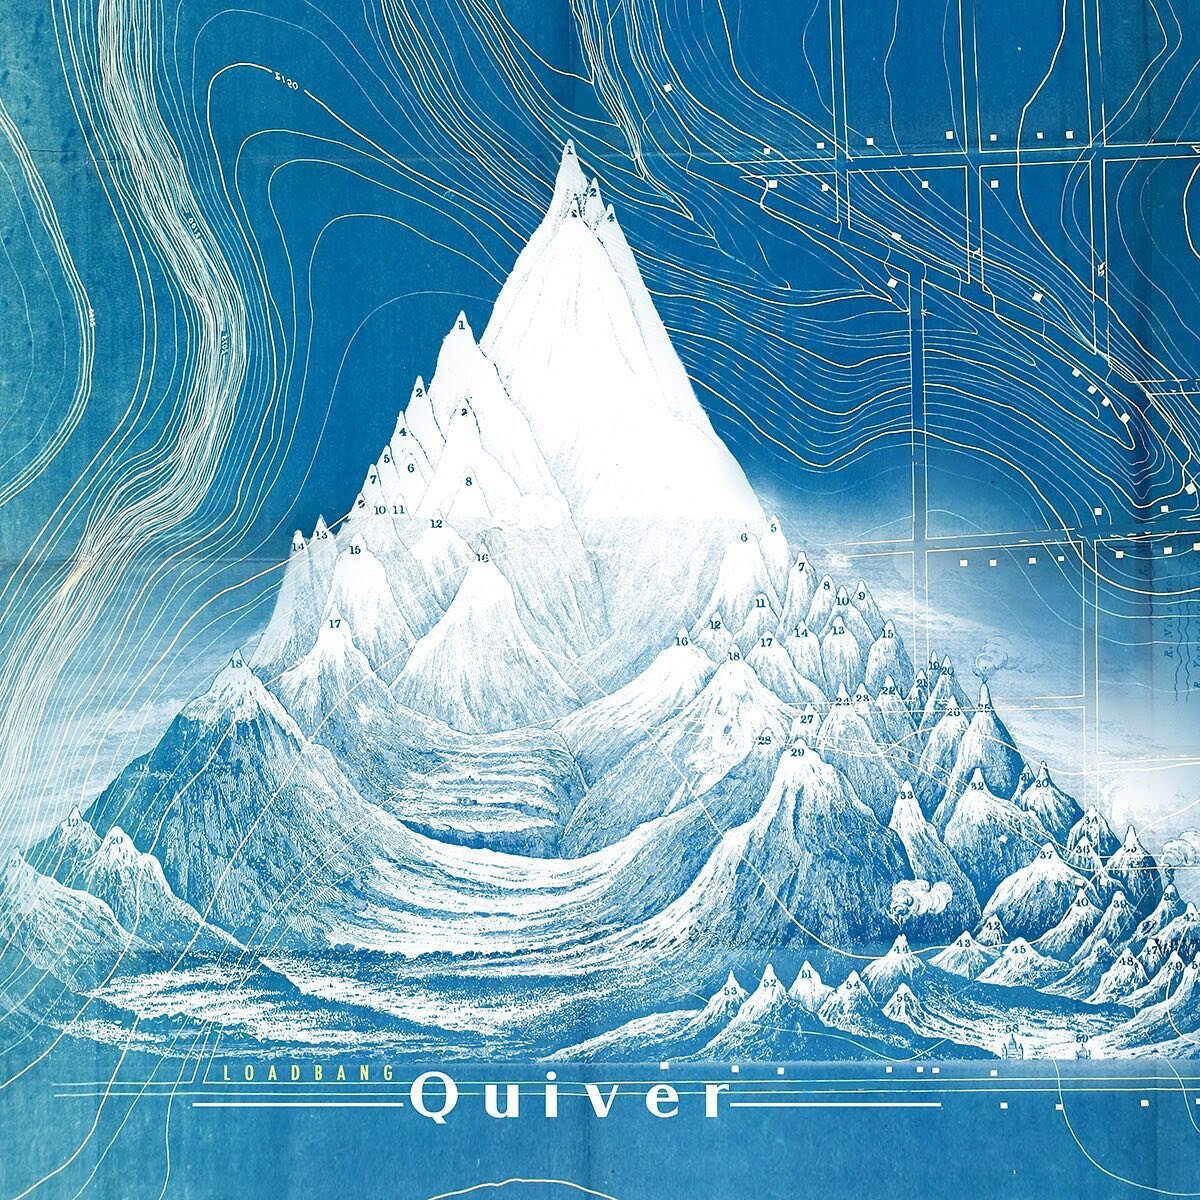 This Friday, my friends in @loadbangensemble will release Quiver on @newfocusrecordings. I am so humbled and grateful to be a part of this project that&rsquo;s been many years in the making. There are some real gems on this album, and it sounds amazi